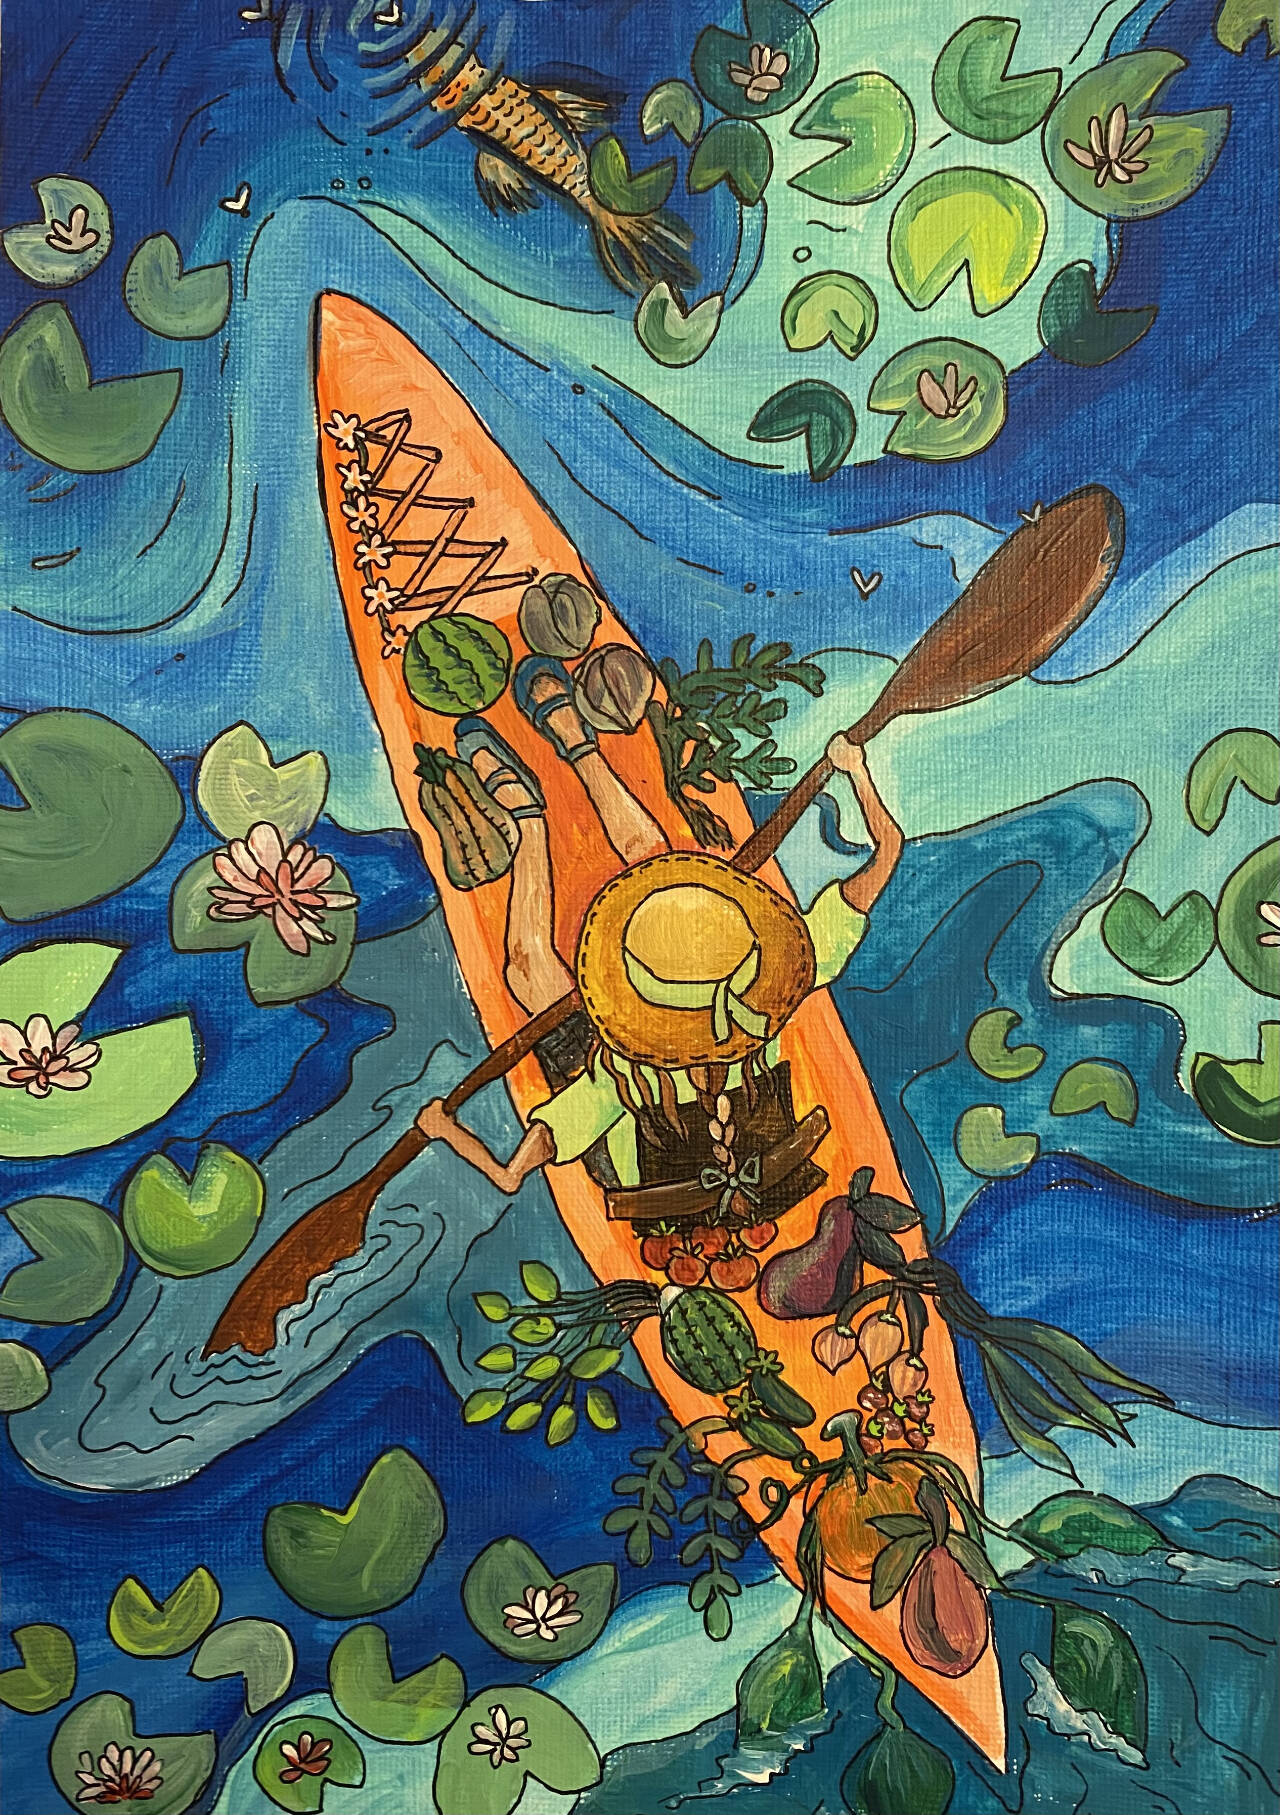 Submitted art / “Kayaking Away from the Farmer’s Market,” by Karlie Viada of Carlsborg, took first place in the PC Student Art & Digital Art division of the 2023 Tidepools Magazine contest.